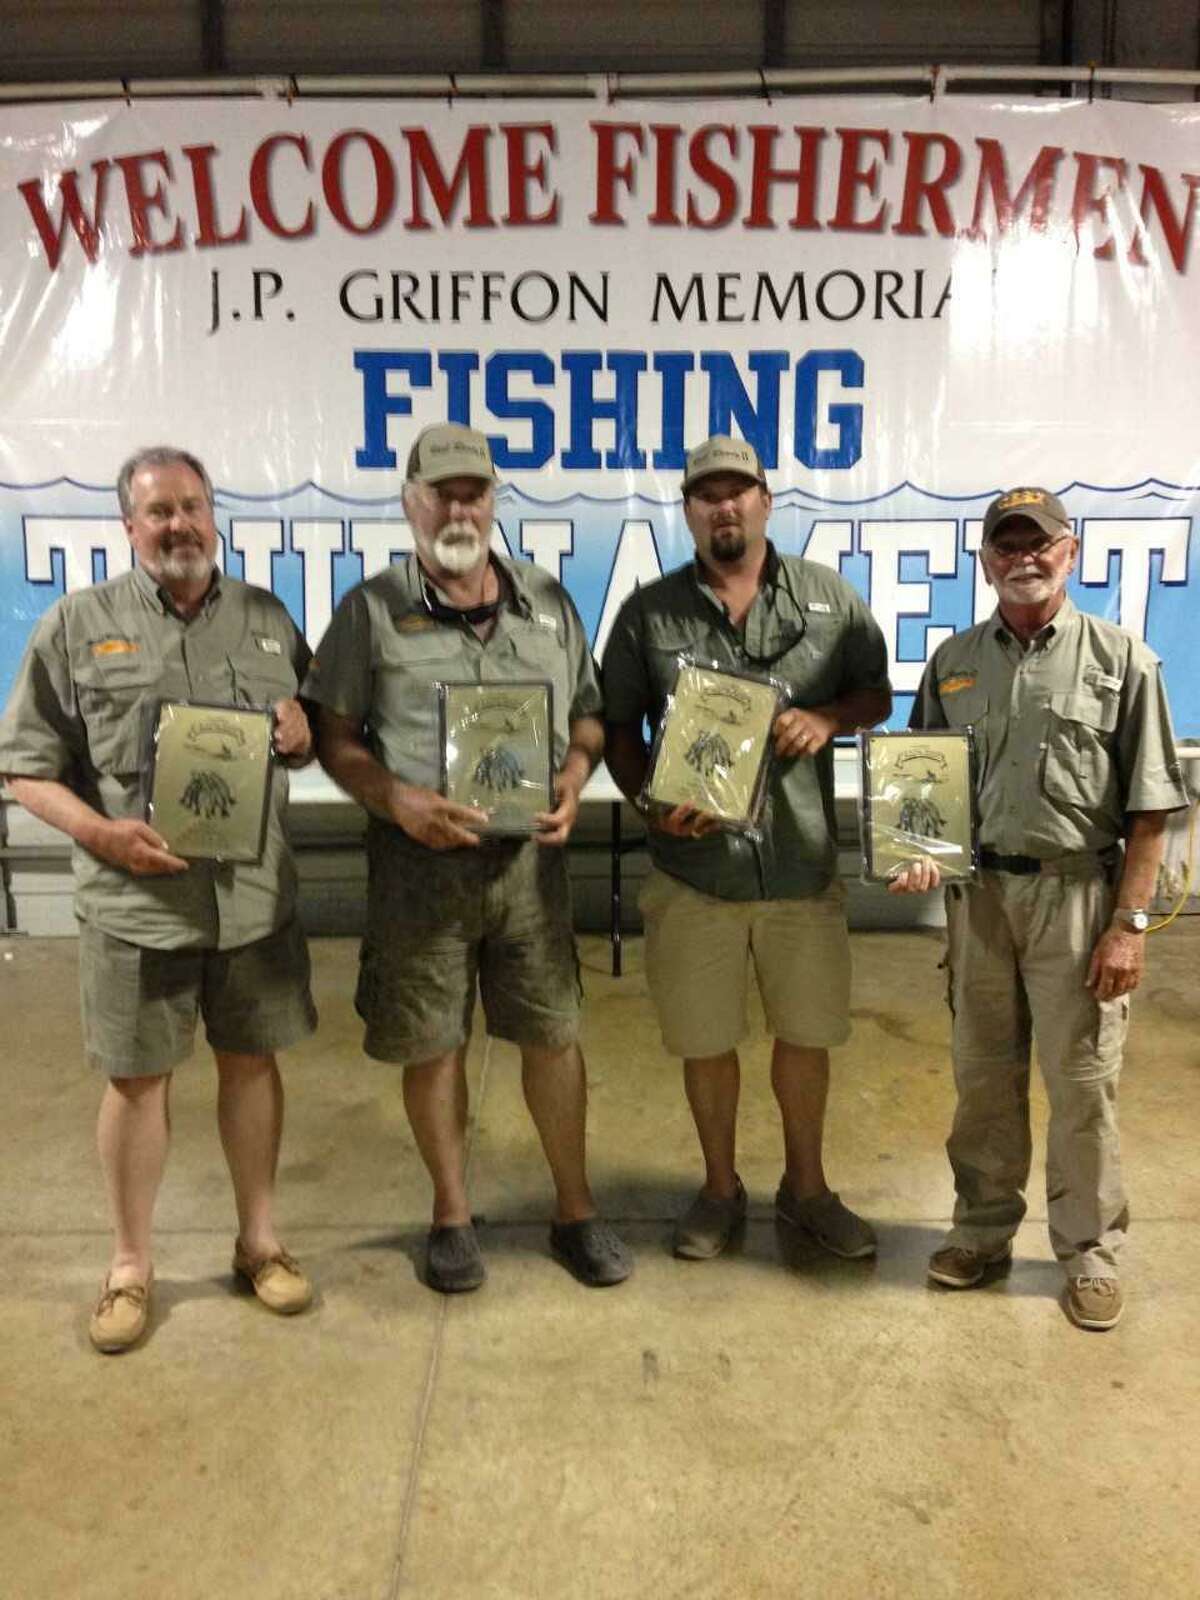 Winners in the open division was team Reel Ready II, consisting of R. Allen Caudle, Scott Becker, Terry Eatherton and Cody Eatherton.